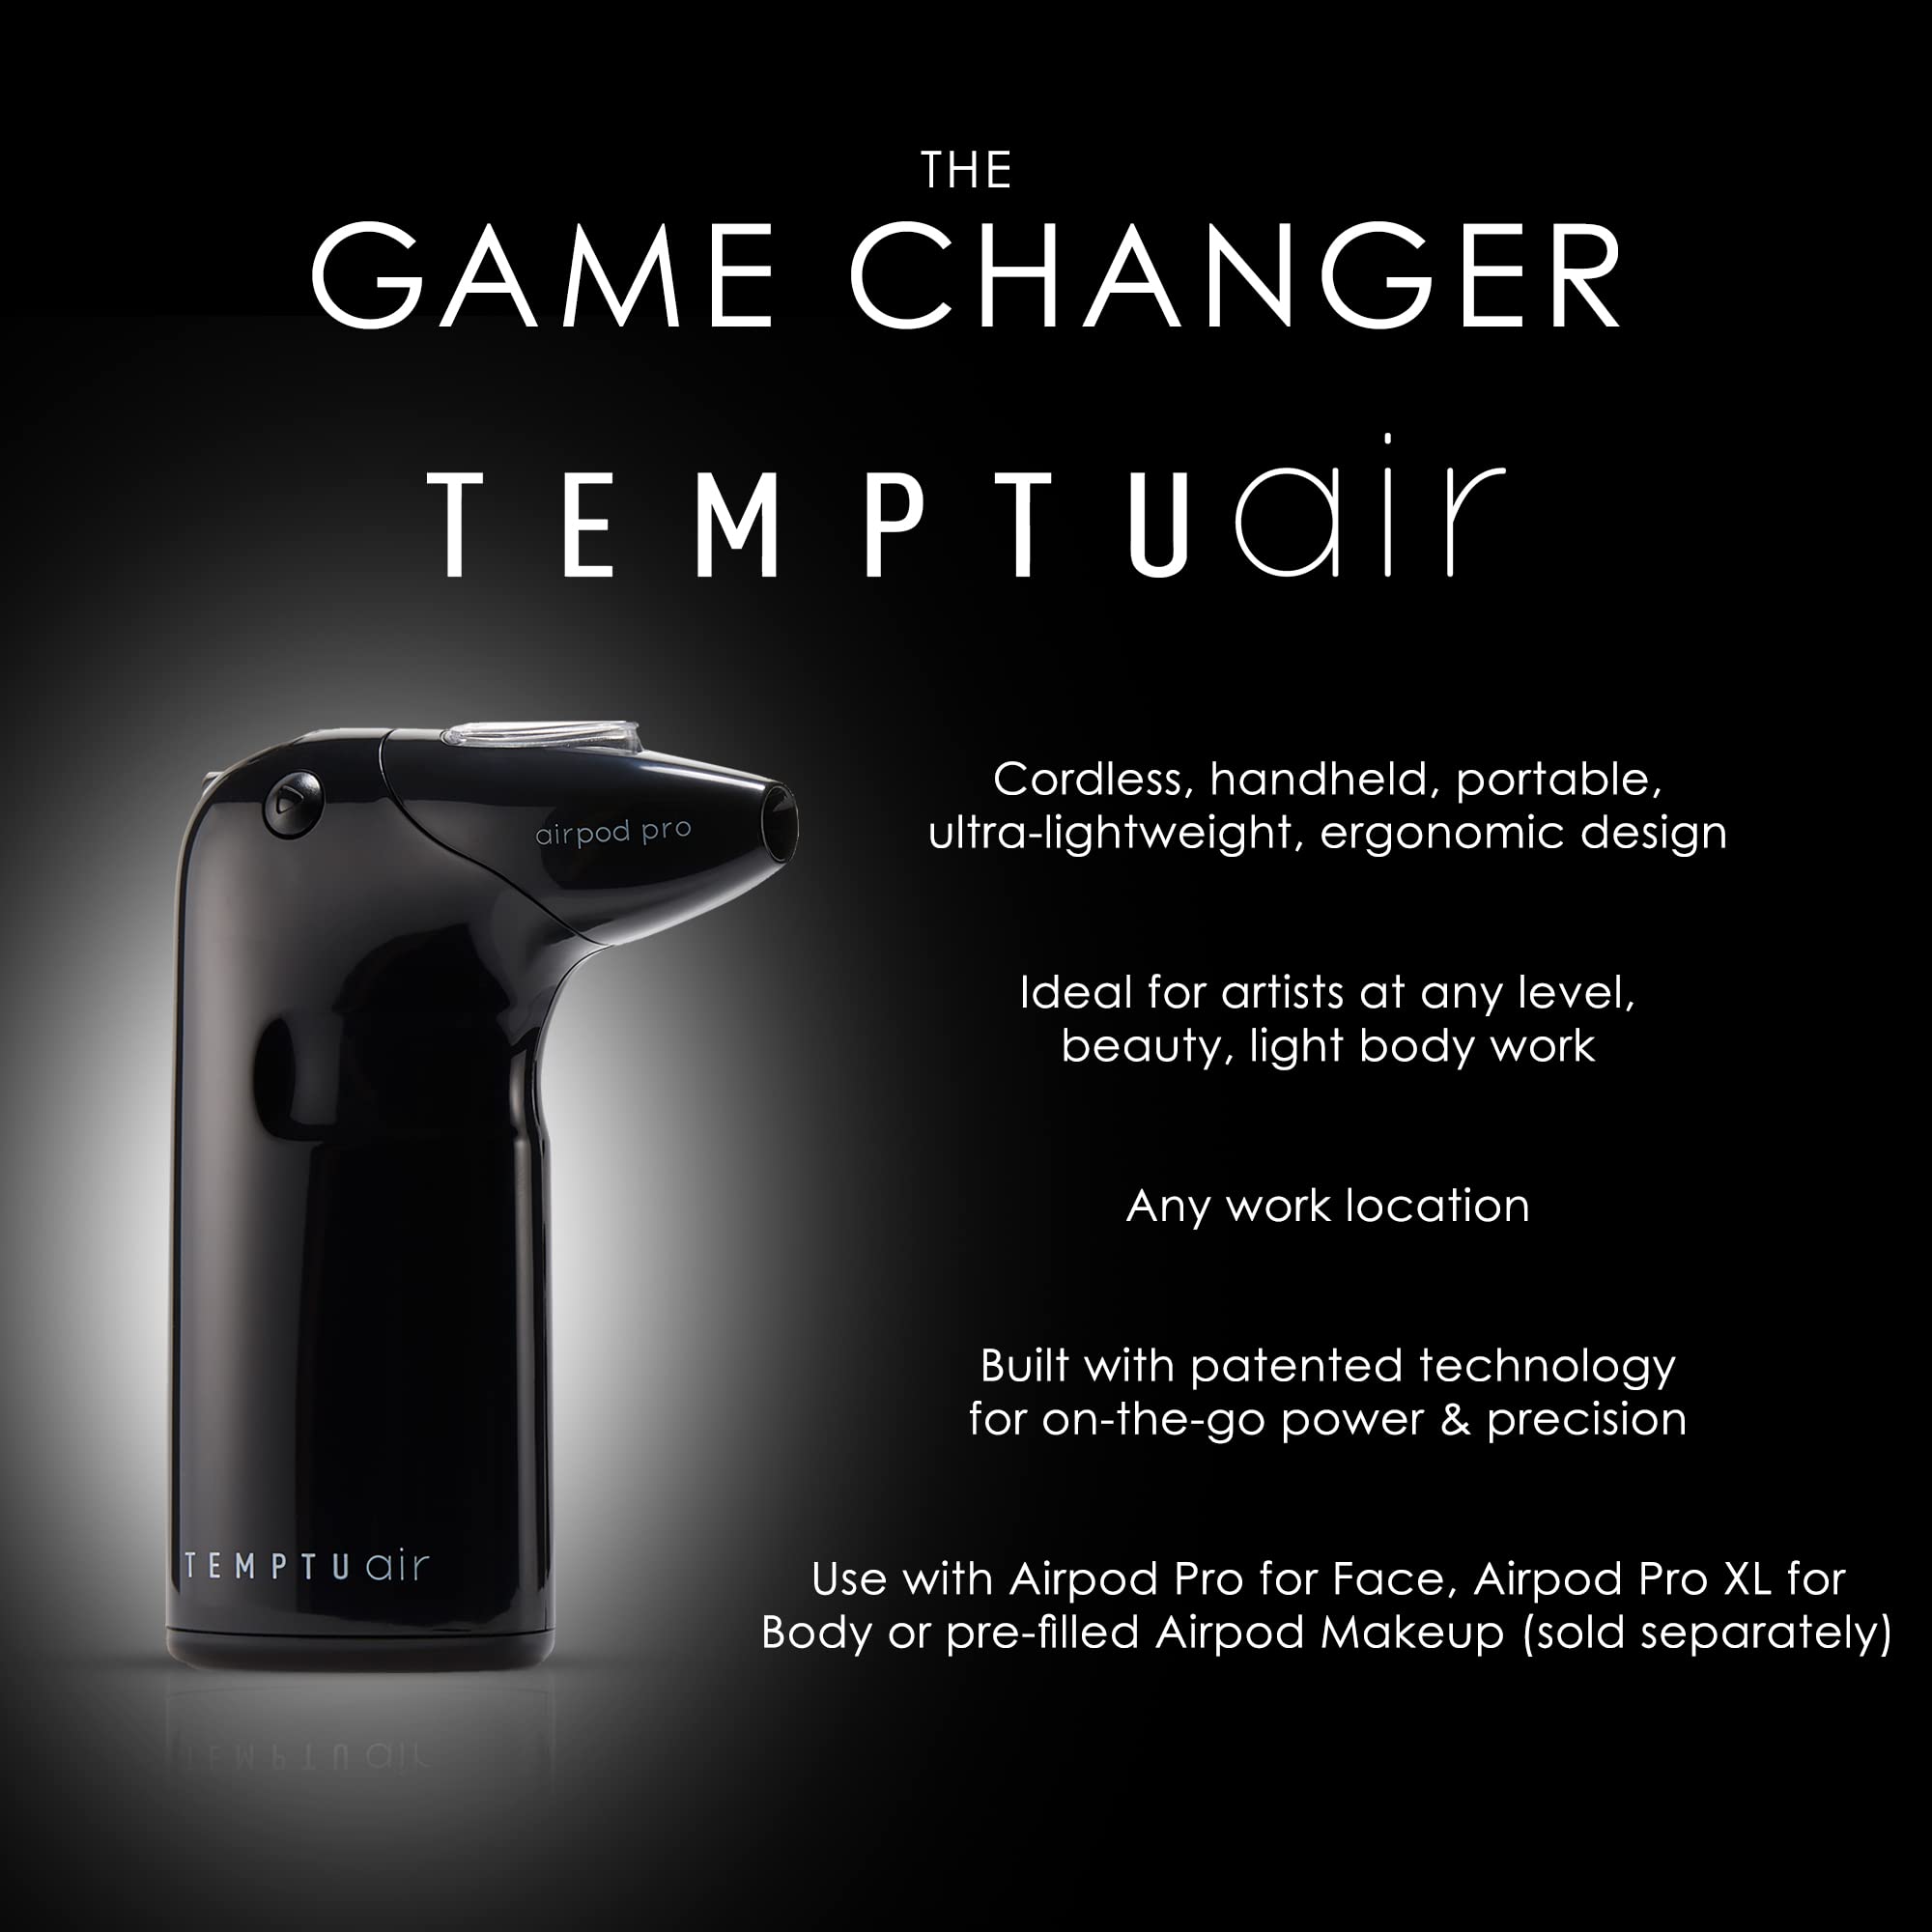 TEMPTU Air: Cordless Airbrush Makeup Tool for Instant Blending and a Natural Luminous Look - Professional Airbrush Makeup System for Use with TEMPTU Makeup Airpods - Available in 3 Colors